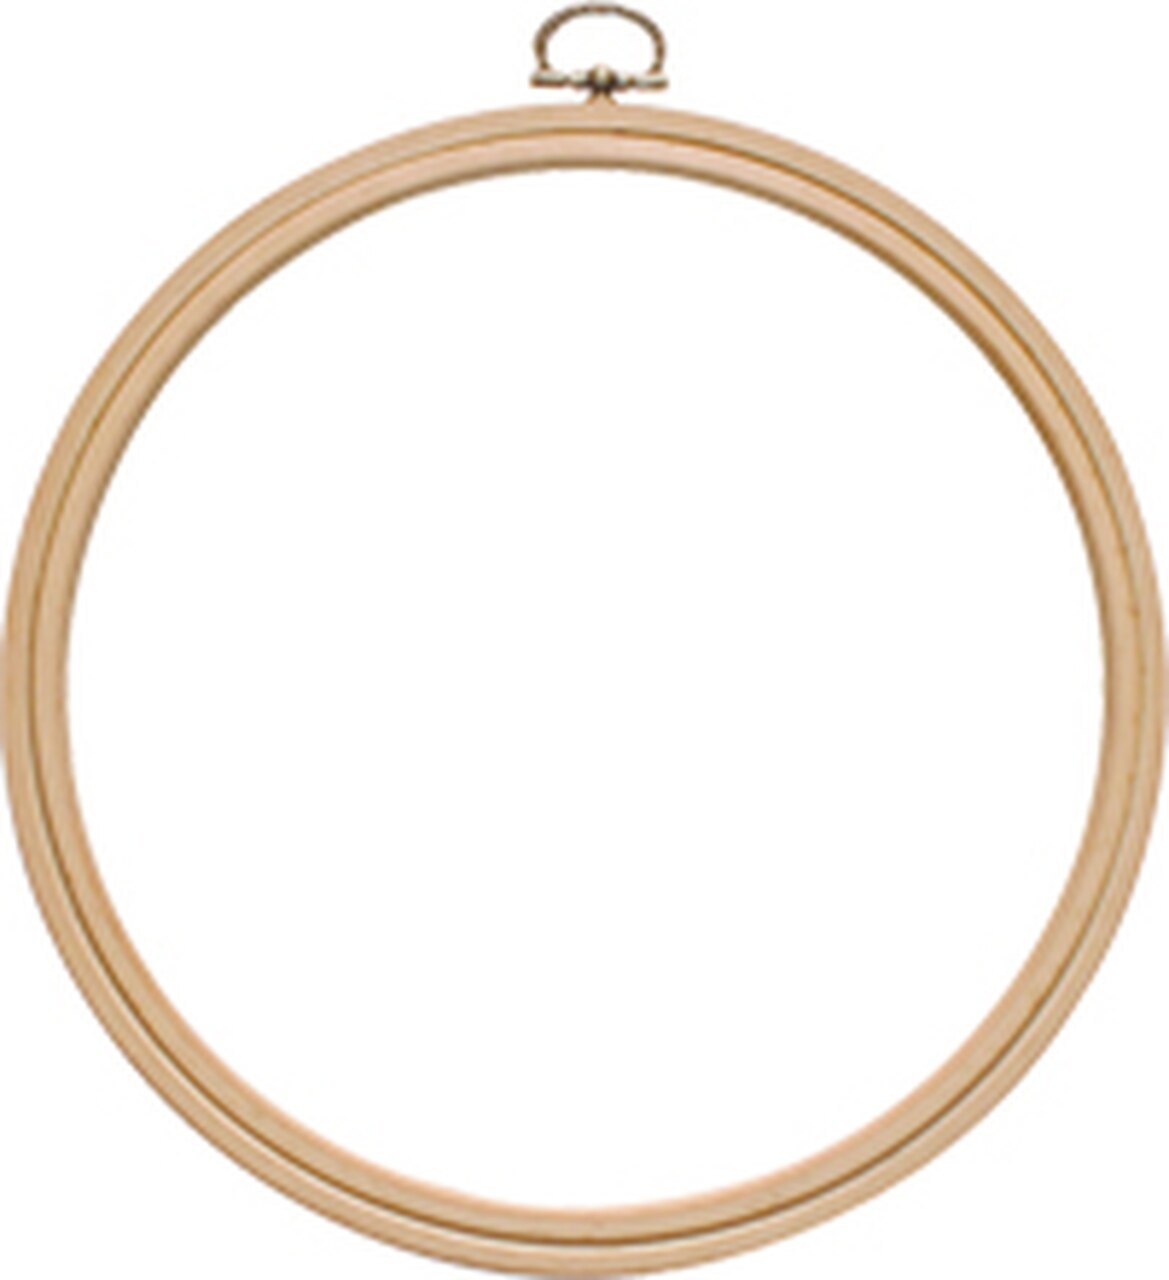 Embroidery Stand With 6inch Hoop - Rotated Embroidery Hoop Stand, Wood  Cross Stitch Frame Stand For Needlework, Hands Free Embroidery Hoop Holder  Embr